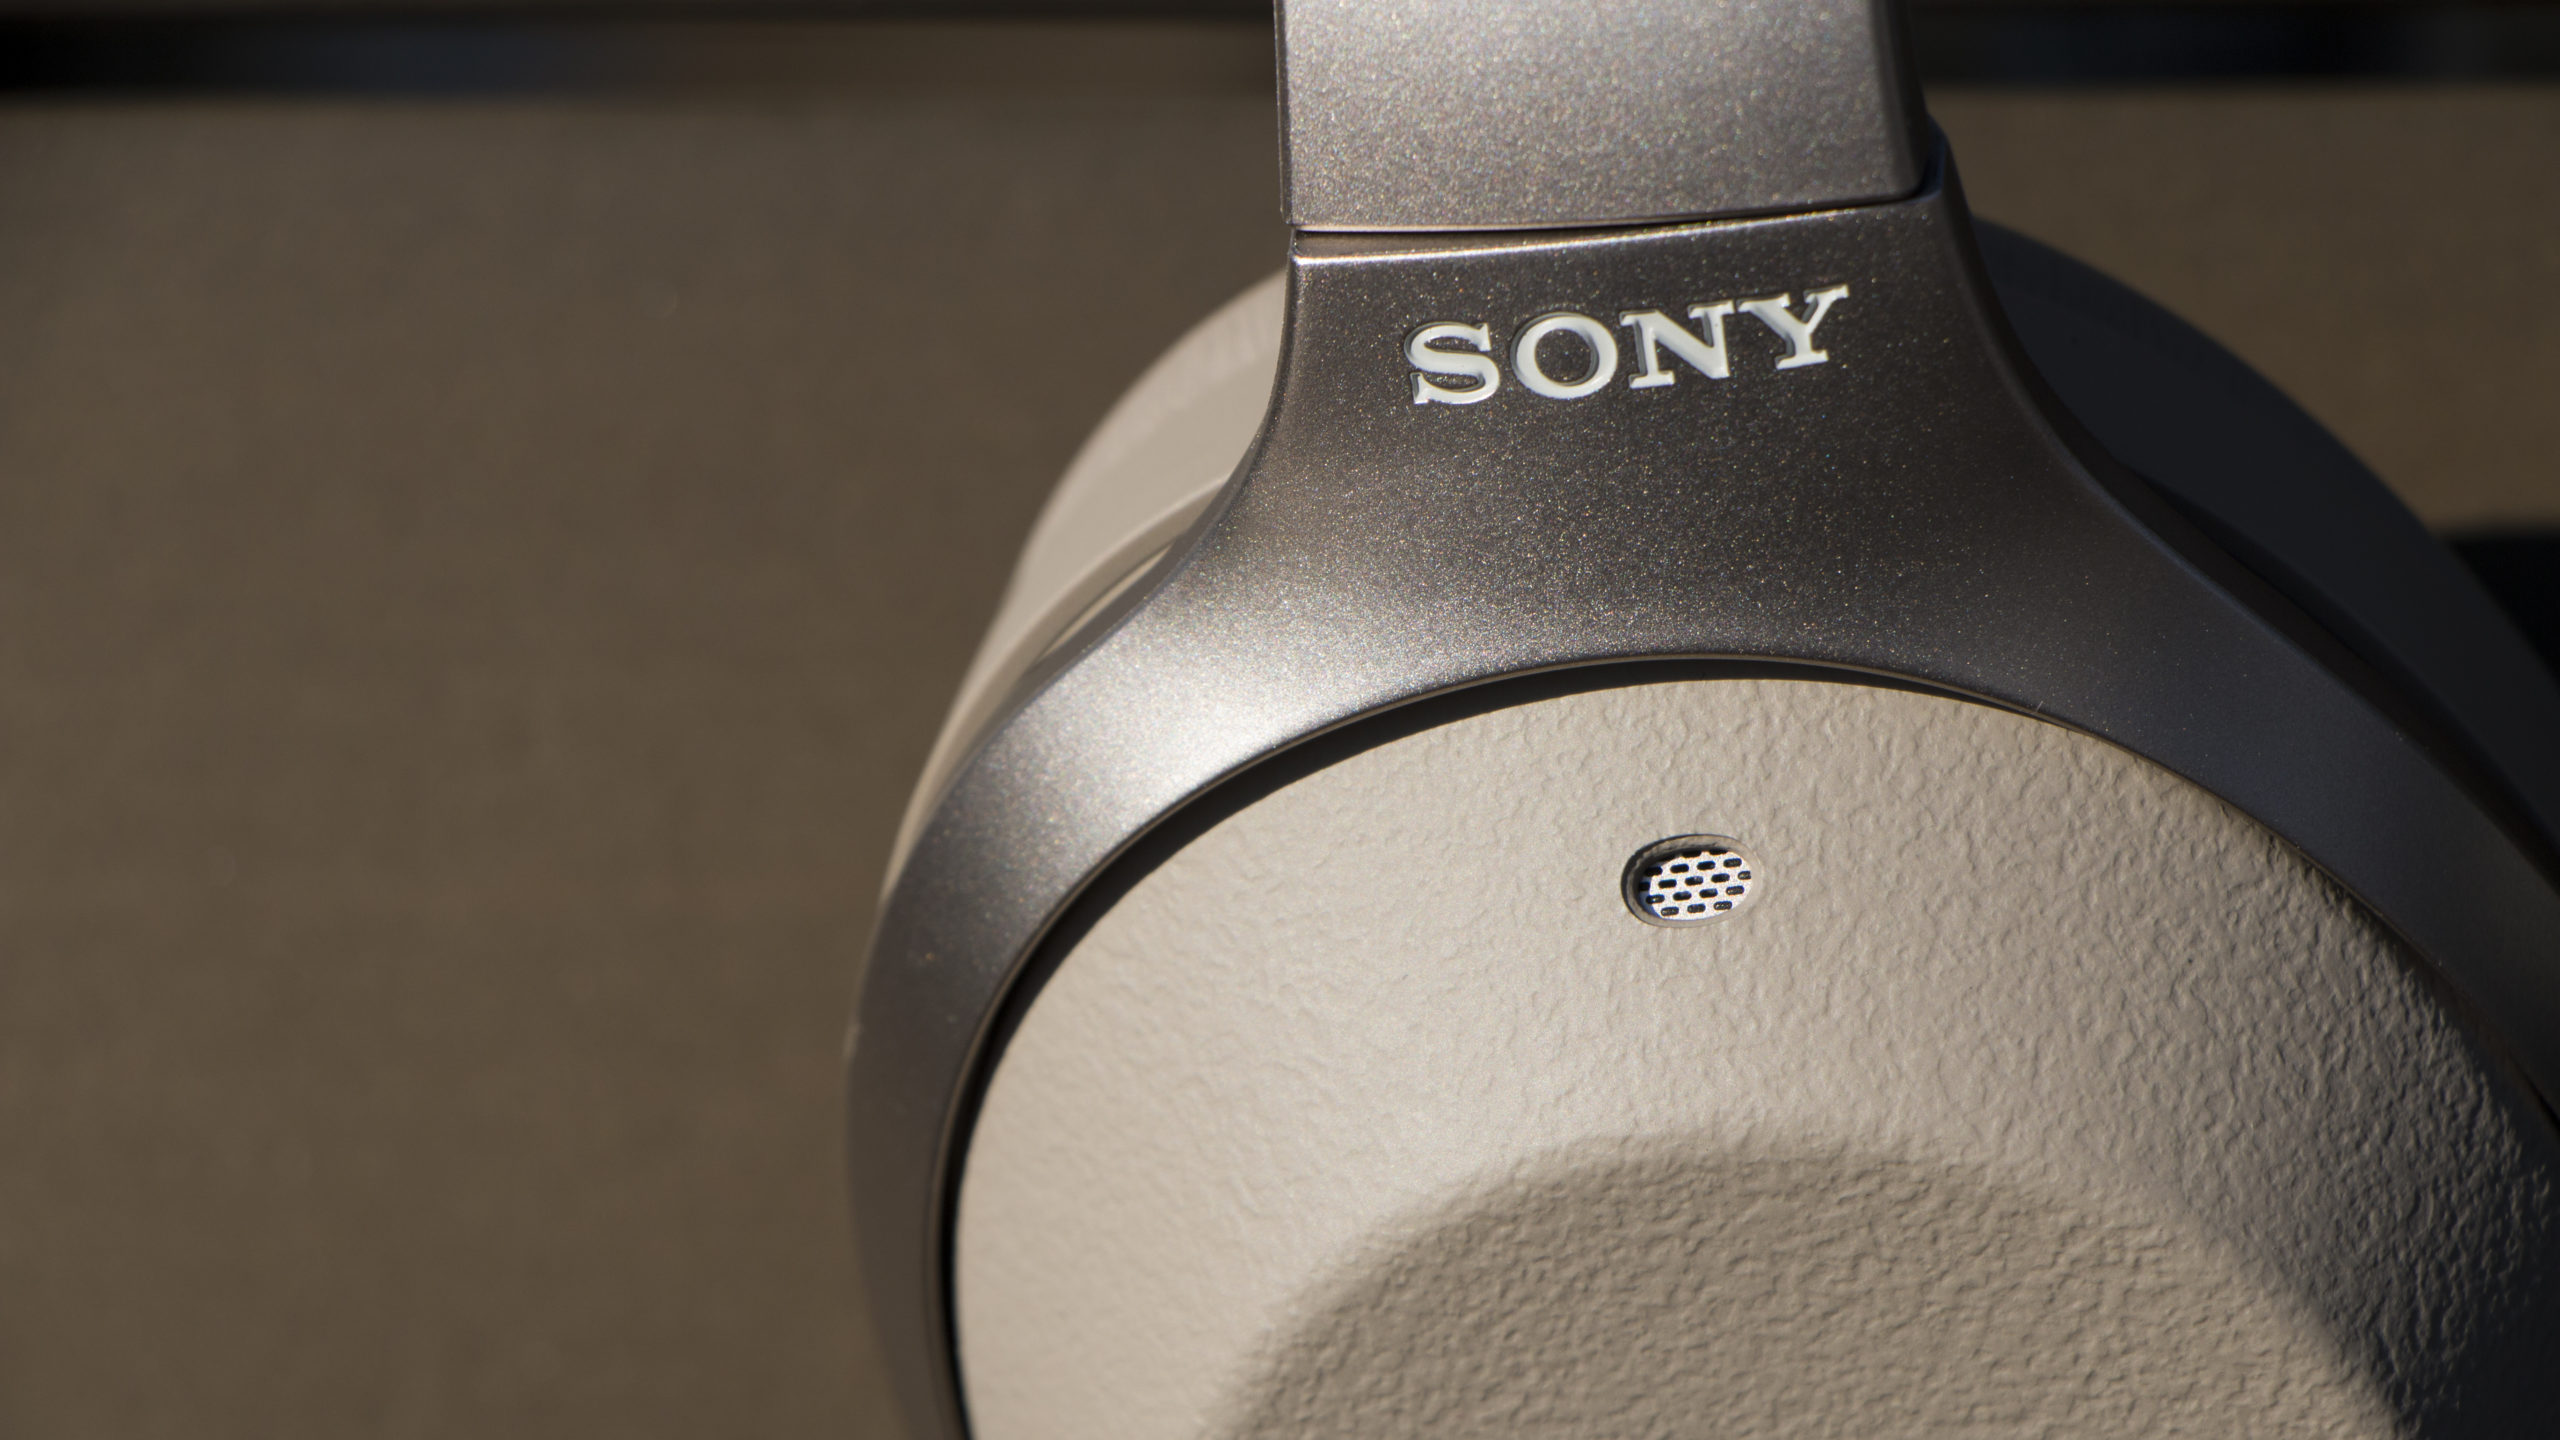 Sony WH-1000MX2 Wireless Noise Cancelling Headphones: The Gizmodo Review